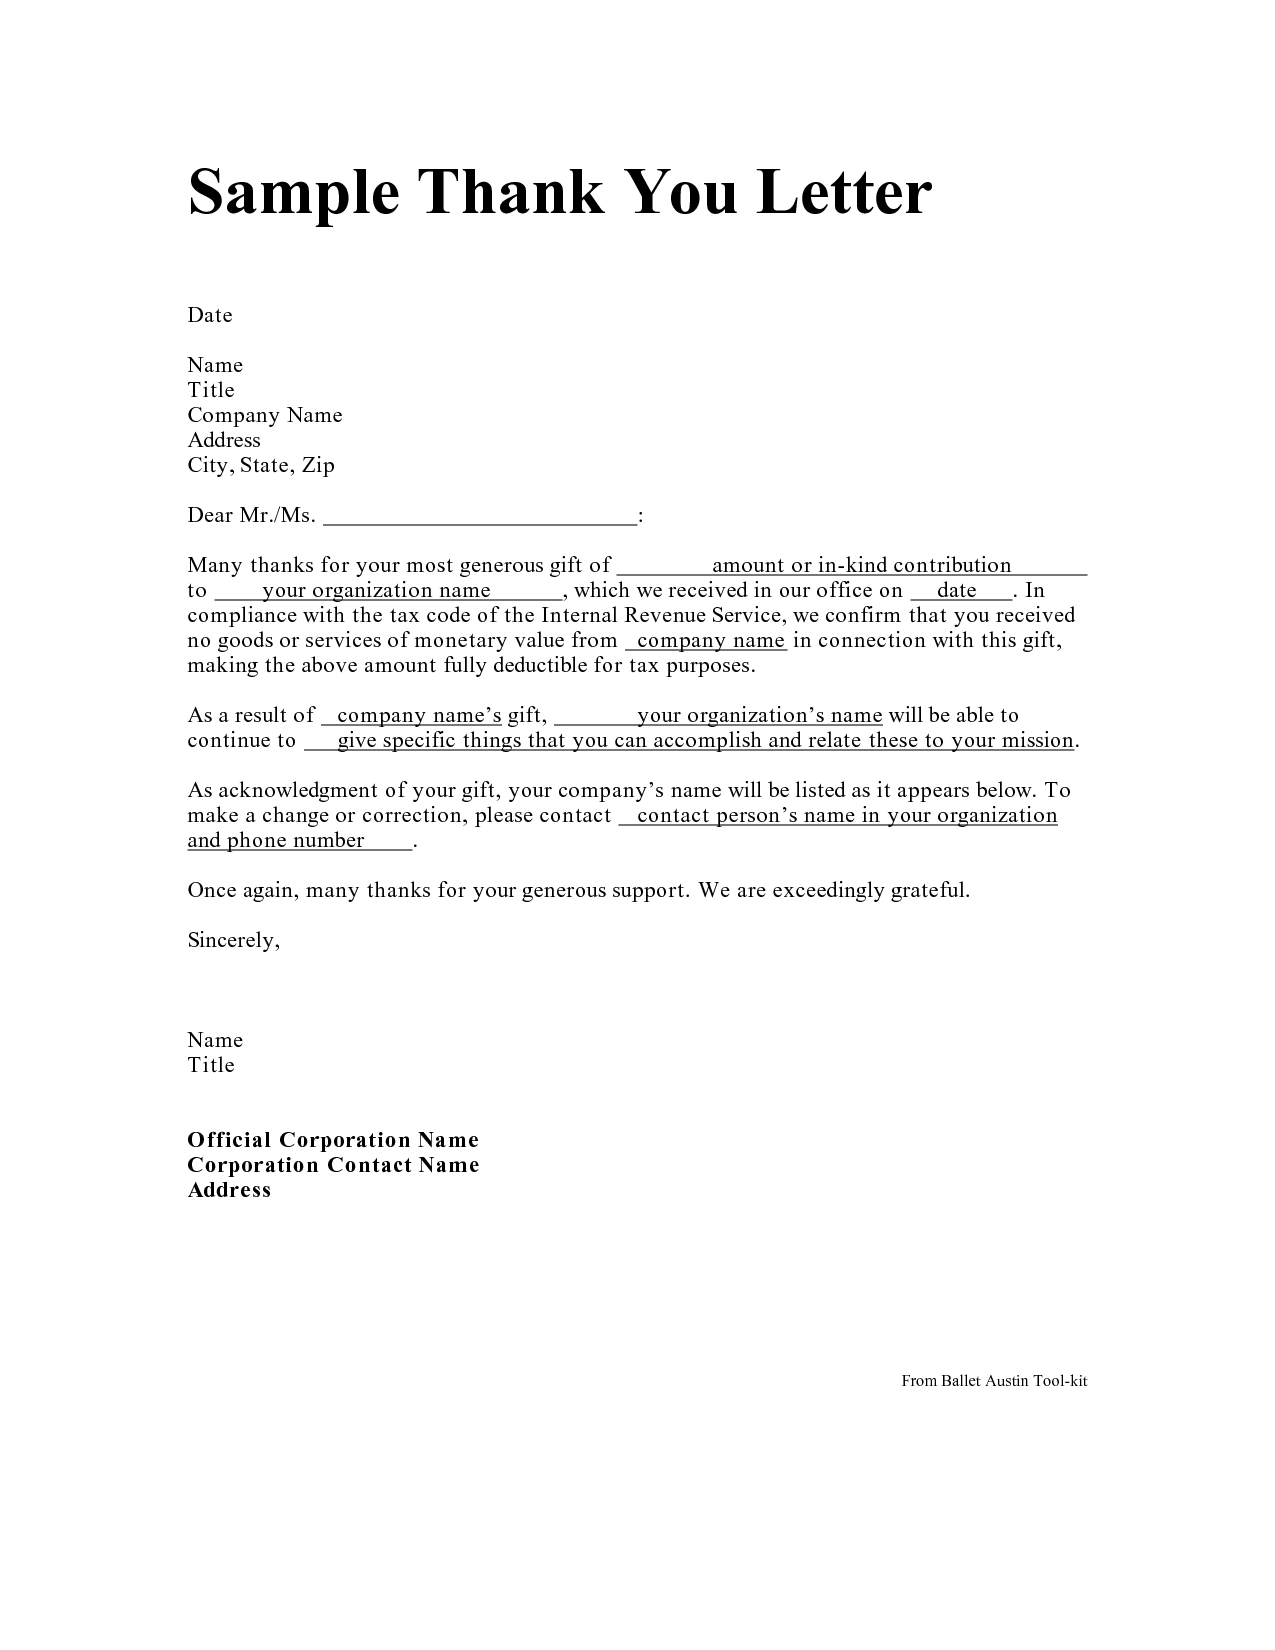 How to Write A Donation Request Letter Template - Personal Thank You Letter Personal Thank You Letter Samples